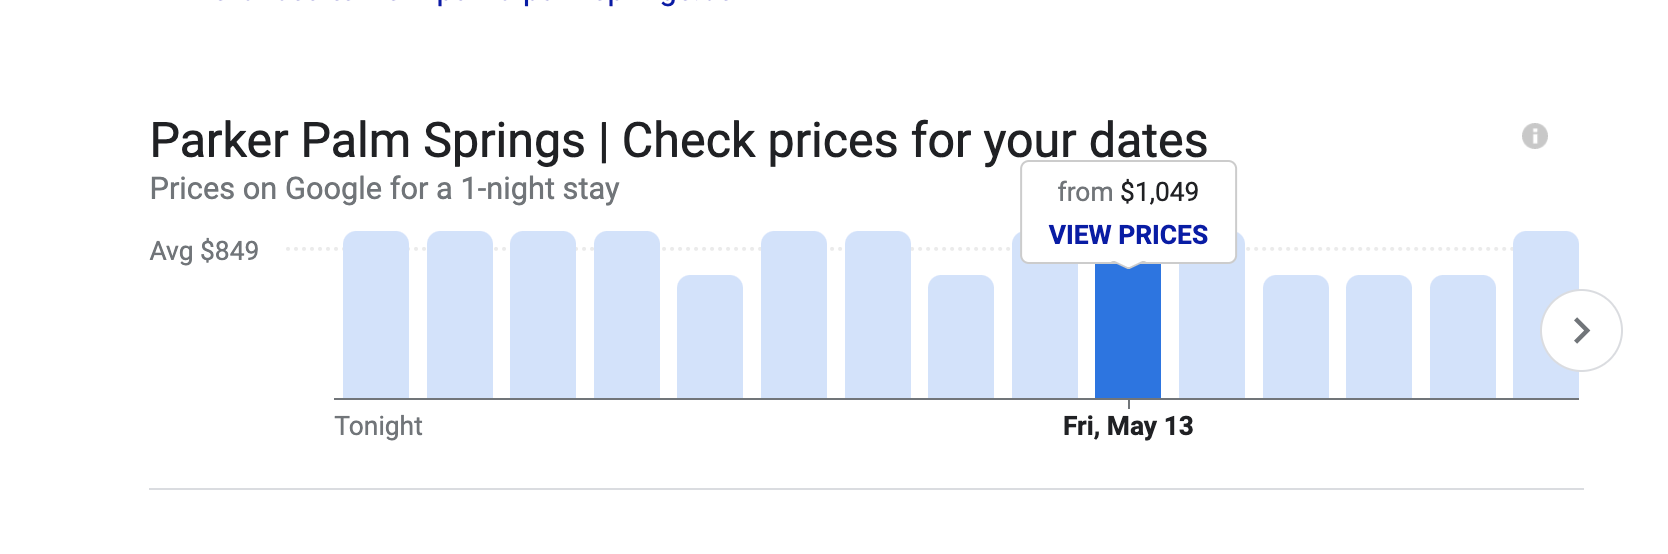 Google image screencap of the pricing for a night at Parker, which is an average of $849 a night